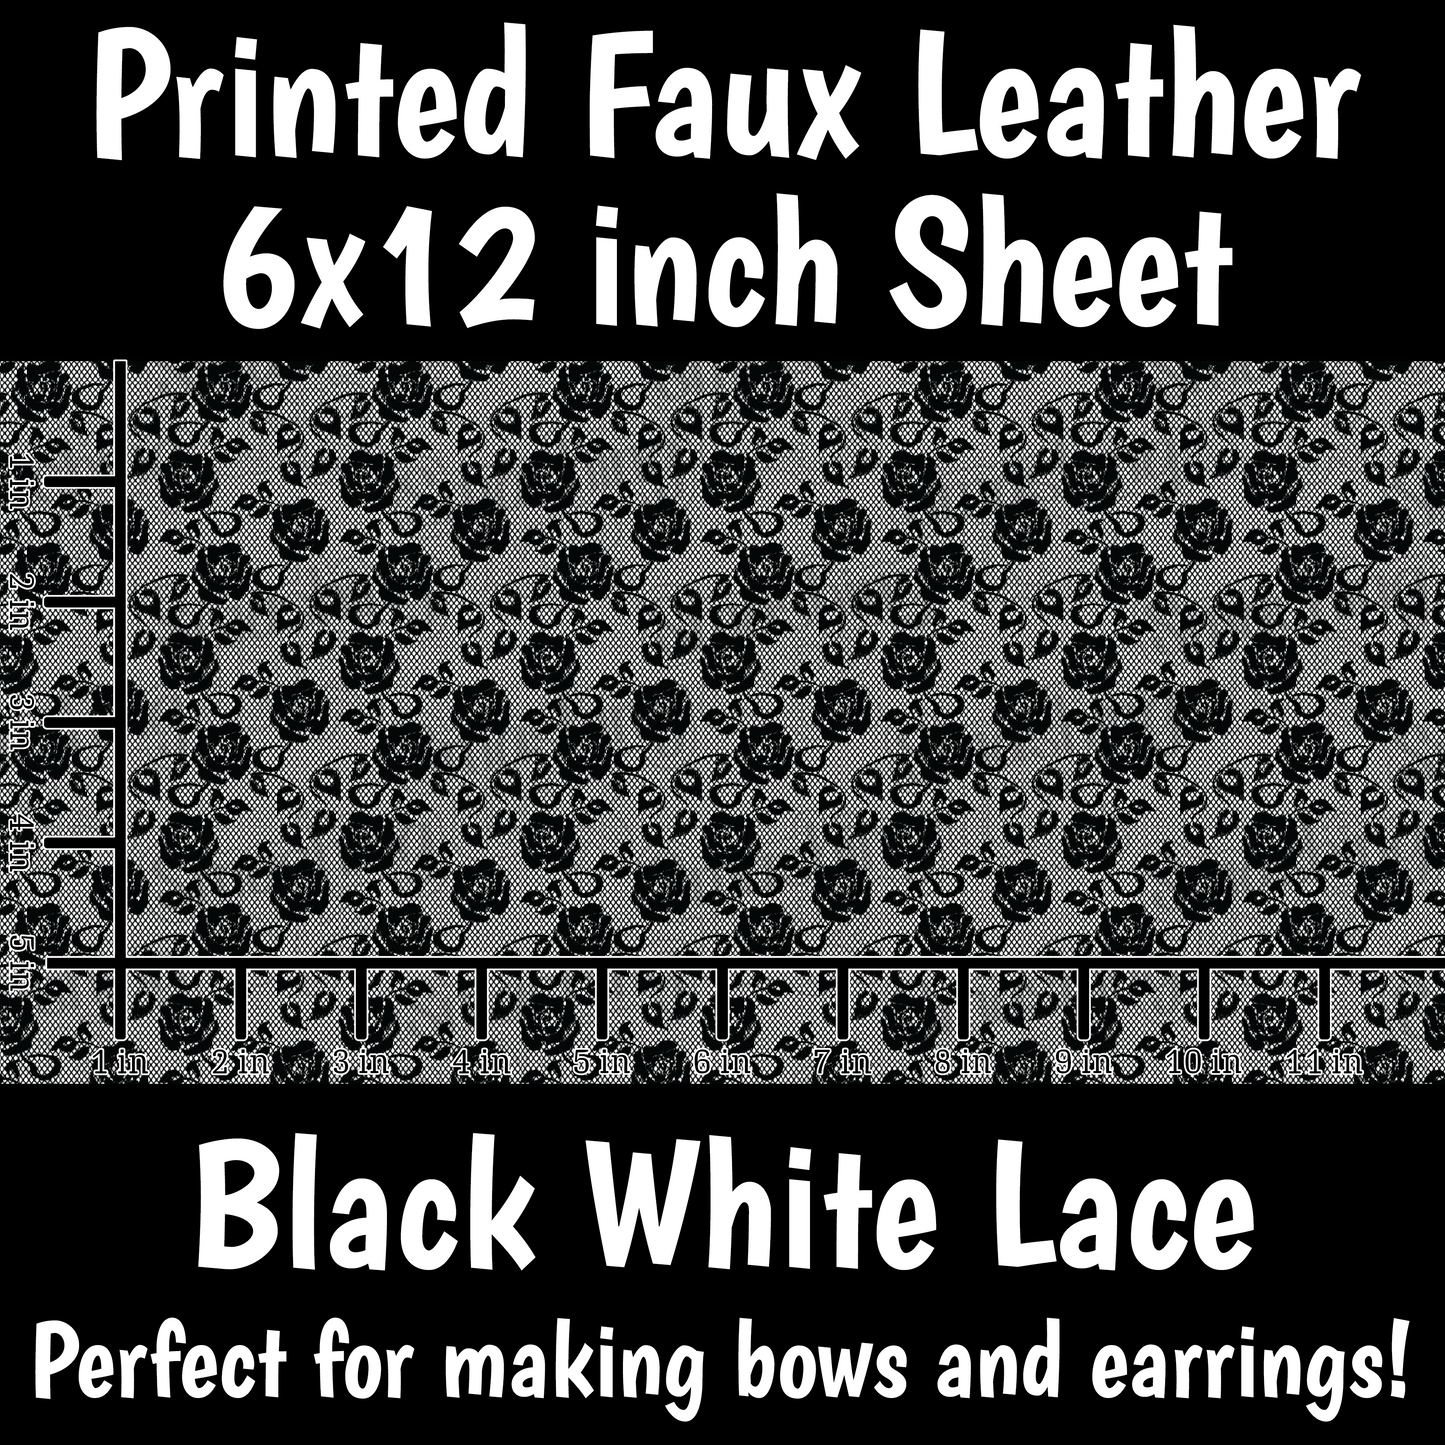 Black White Lace D - Faux Leather Sheet (SHIPS IN 3 BUS DAYS)